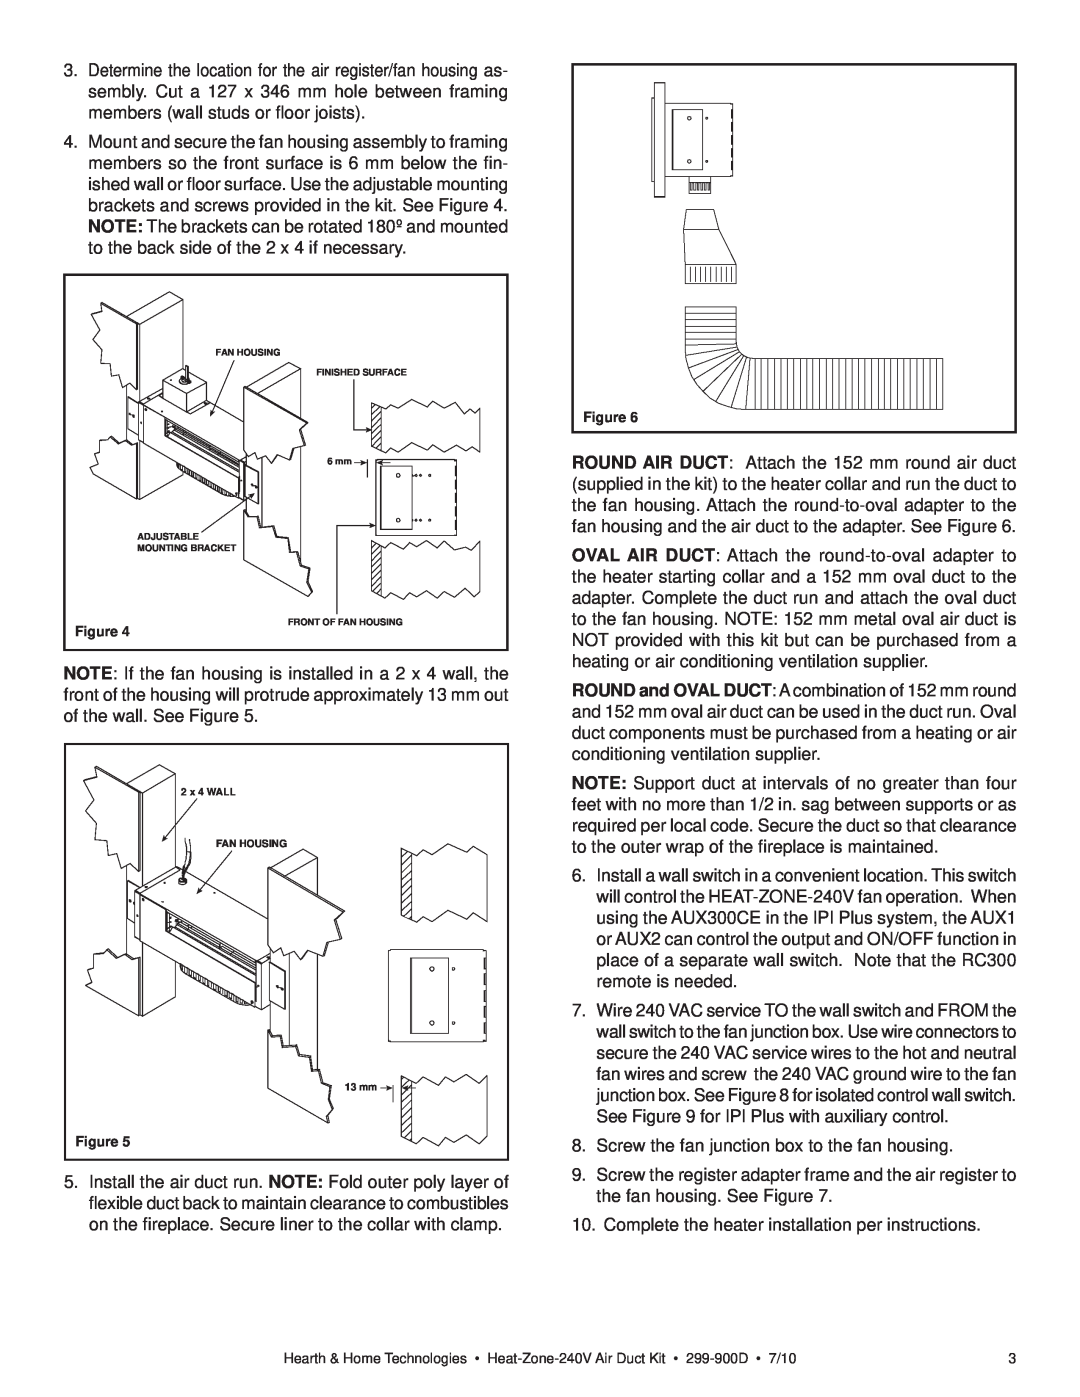 Hearth and Home Technologies 299-900D manual Screw the fan junction box to the fan housing 